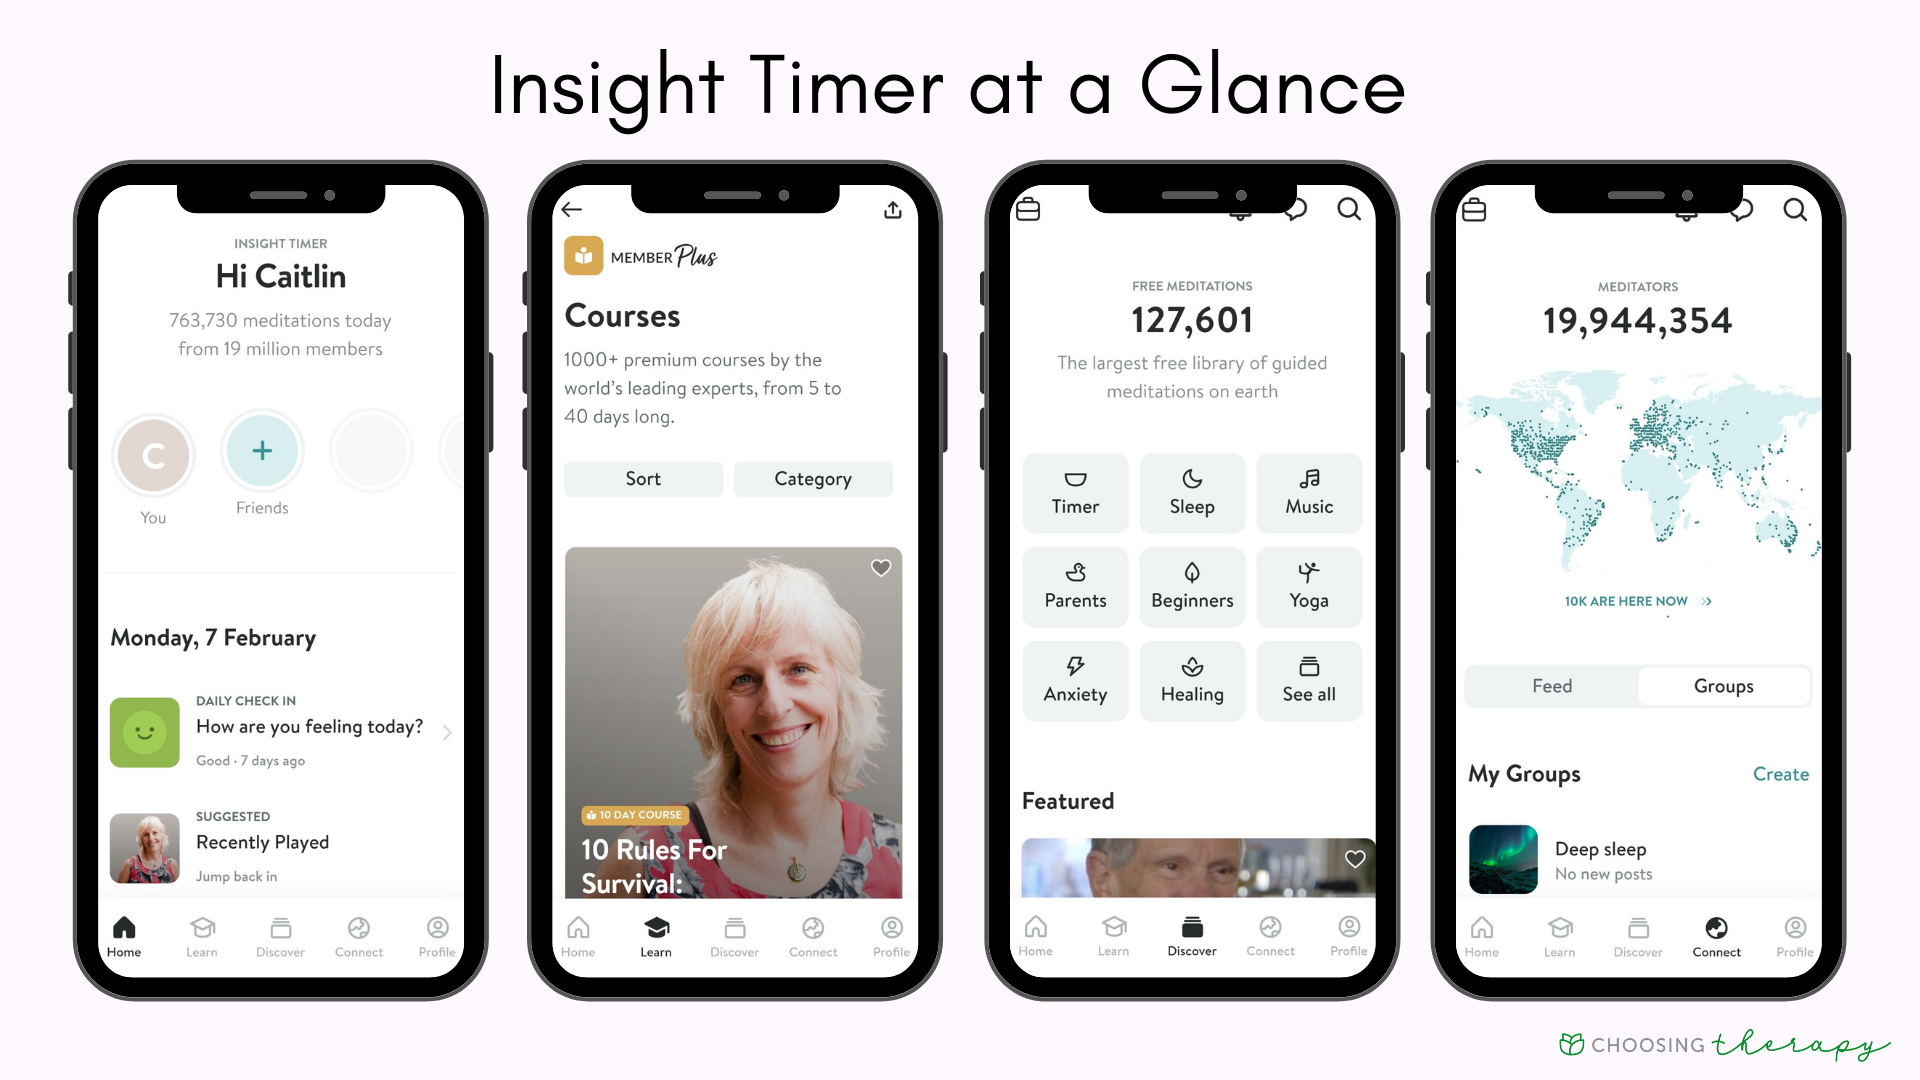 Insight Timer App Review 2022 - Image of Insight Timer's home page, Courses page, 120,000 free meditations, and 19.9 million total meditations